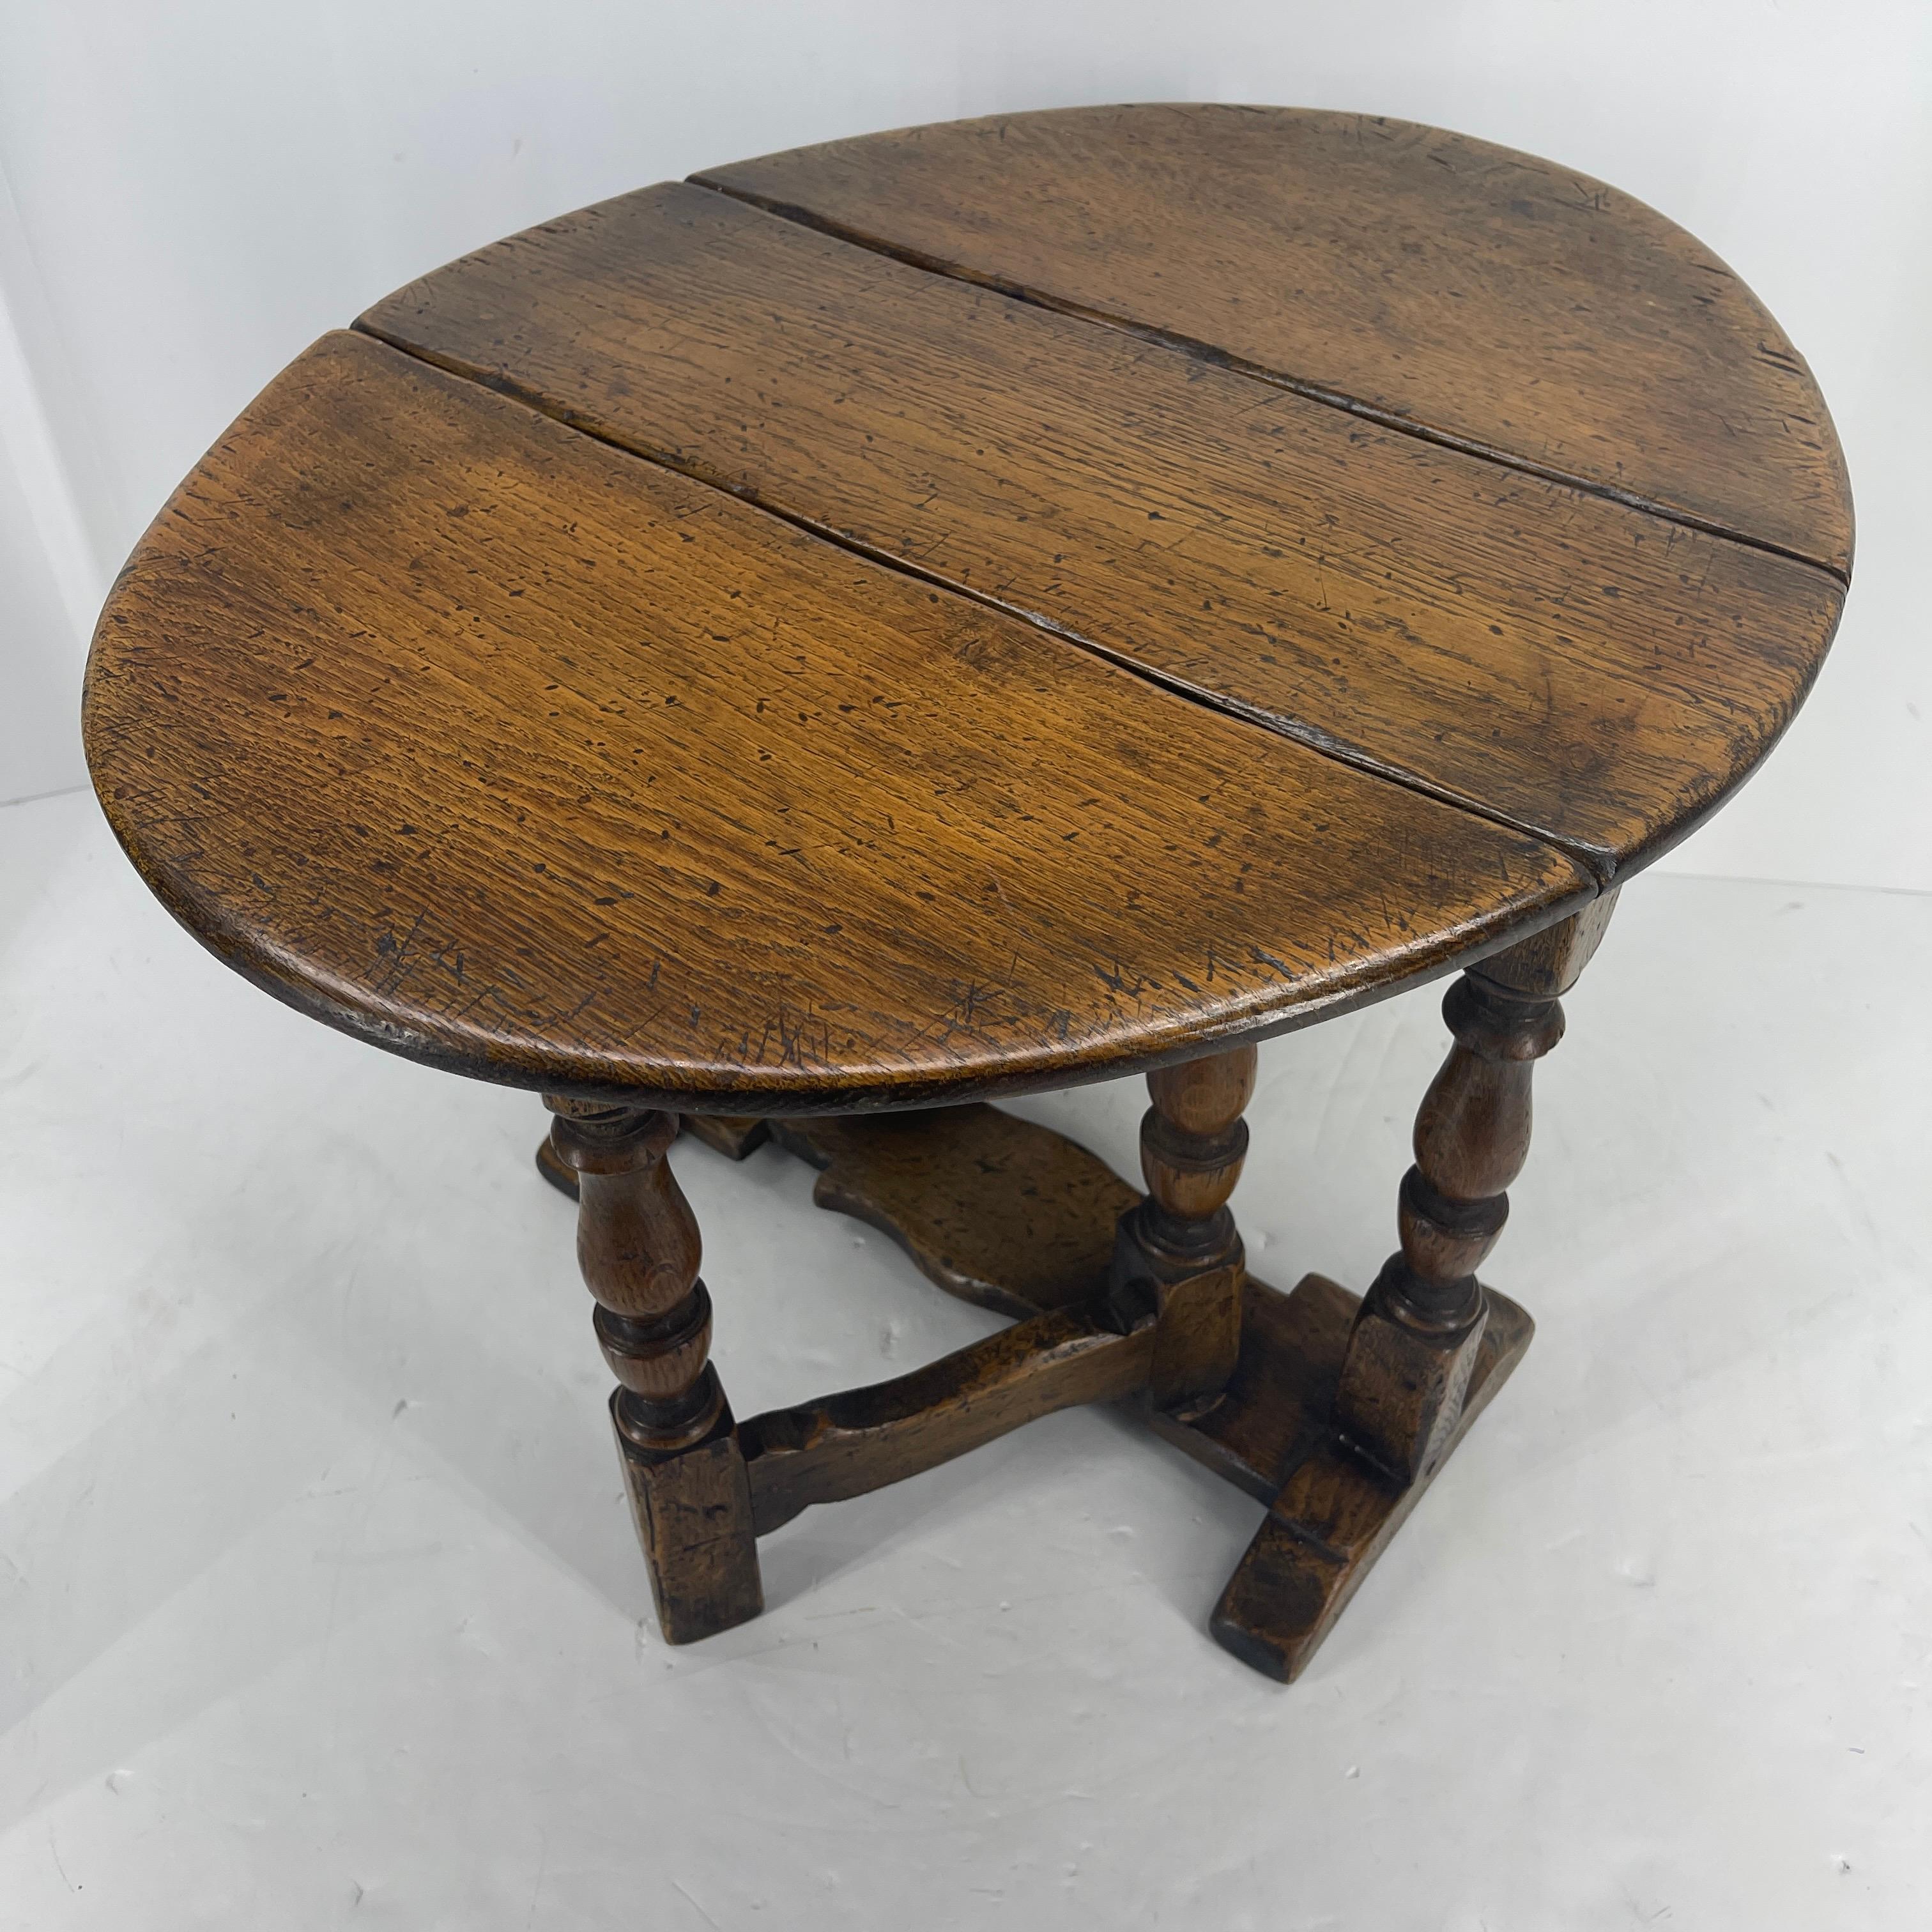 Rare small Victorian oak salesman sample Gate leg table. Boasting a marvelous top with two drop leaves, it has two swing out gate legs for support and is raised on shaped feet united by a flat oak stretcher. This is a rare little piece; it is, as